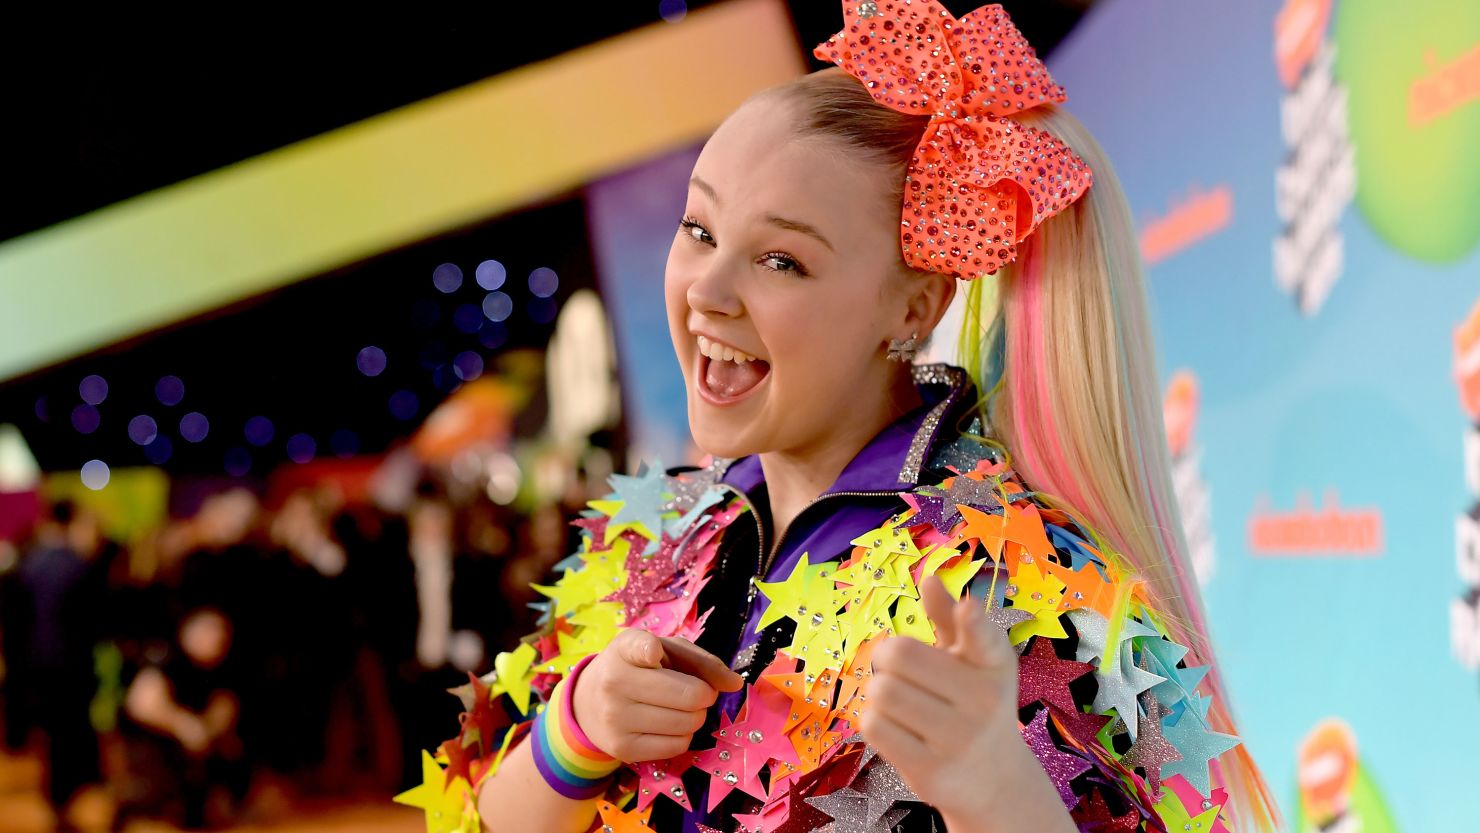 JoJo Siwa, seen here attending the Nickelodeon's 2019 Kids' Choice Awards at Galen Center on March 23, 2019 in Los Angeles, California, is joining the cast of "Dancing with the Stars." 